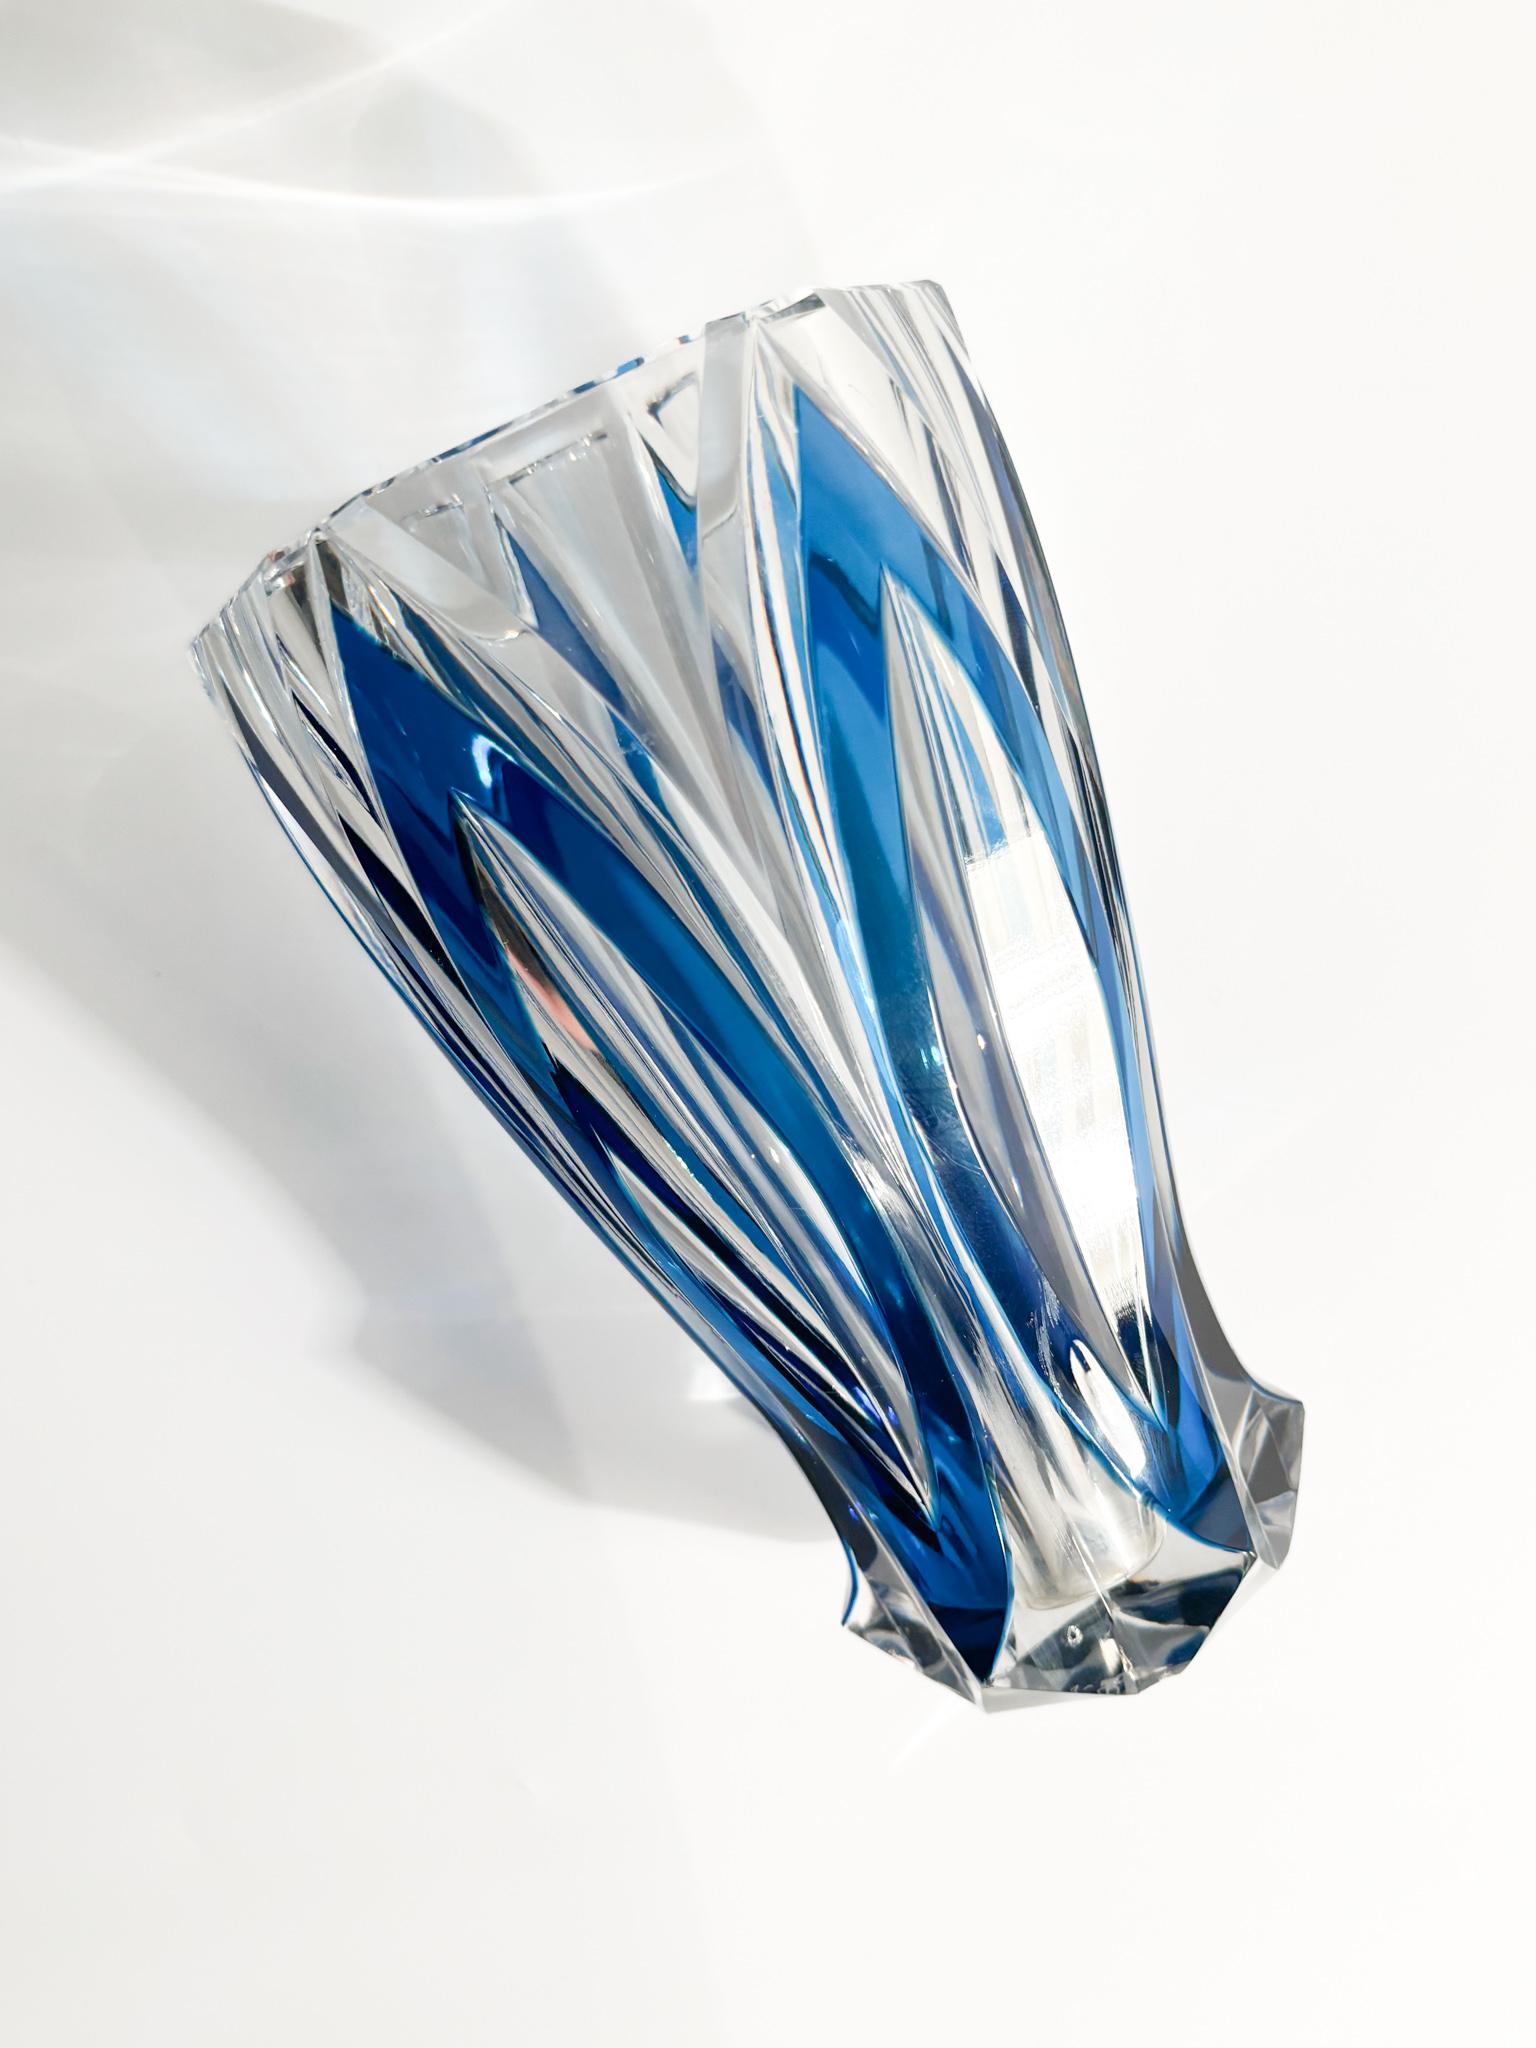 Saint-Louis Blue French Crystal Vase from the 1940s For Sale 7